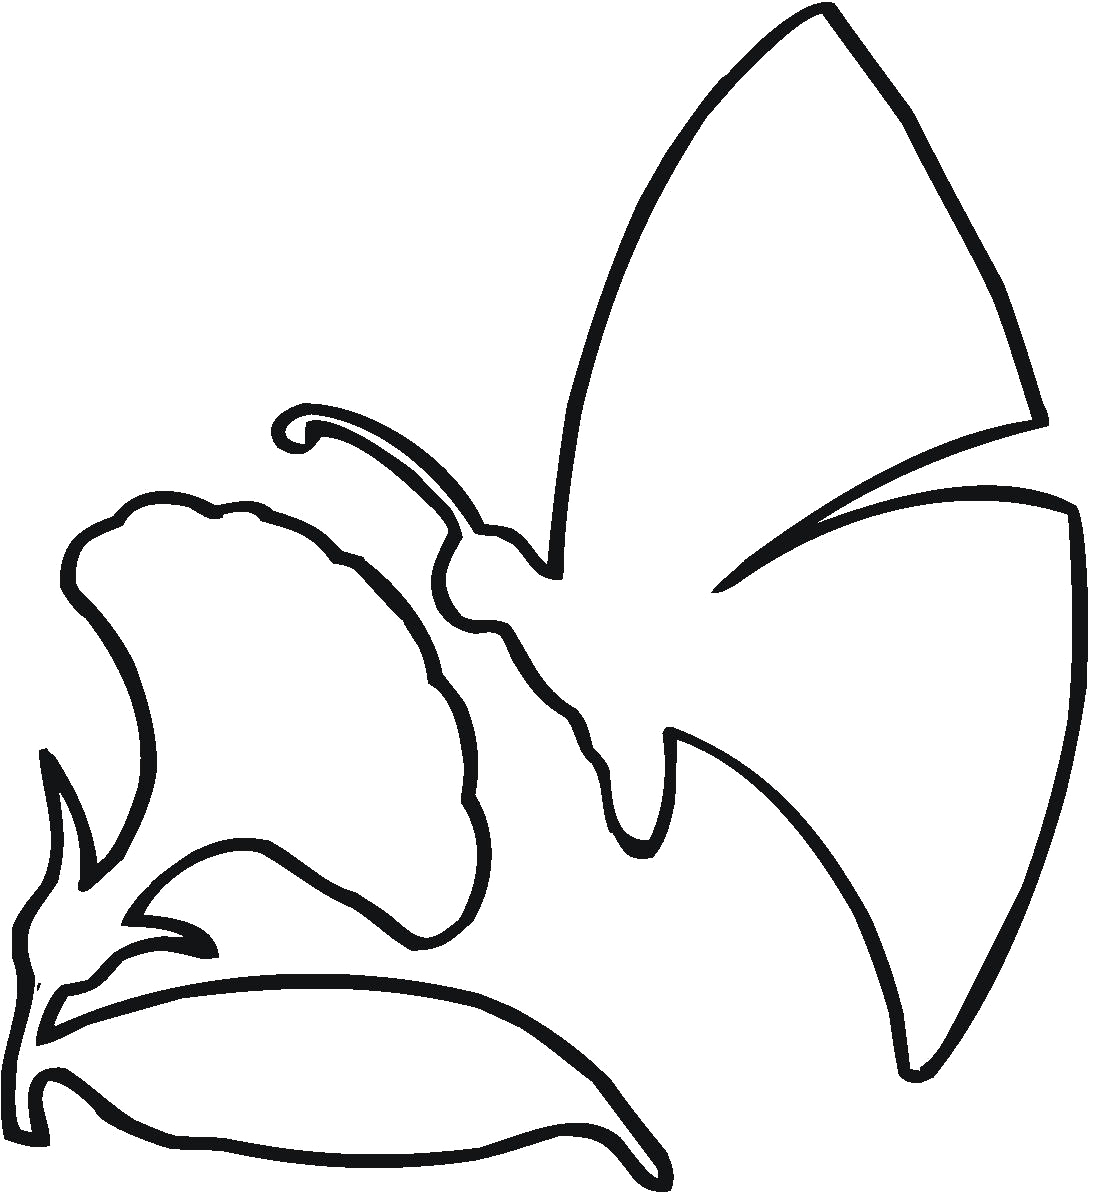 Best Photos of Flower Outline Coloring Pages - Flower Coloring ...